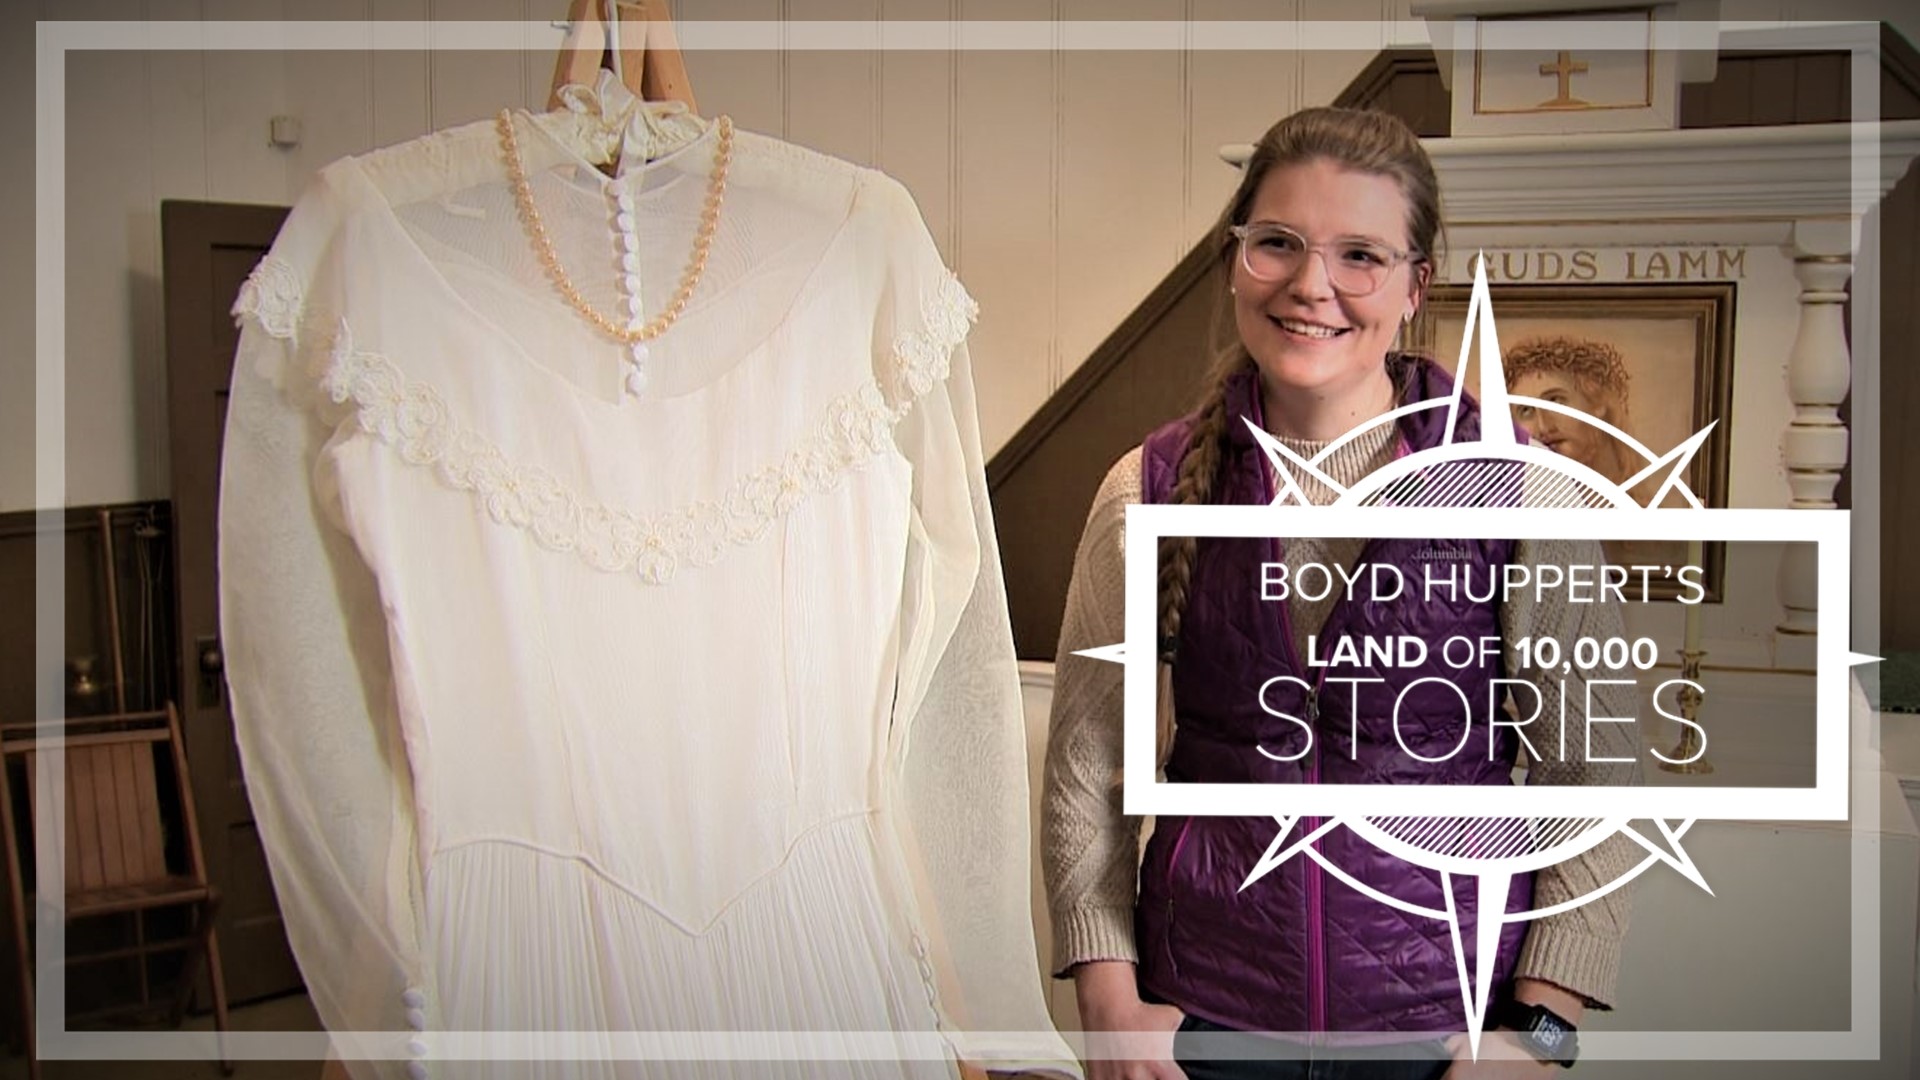 Anna Amann is the latest bride in her family to wear her great-grandmother's wedding dress.